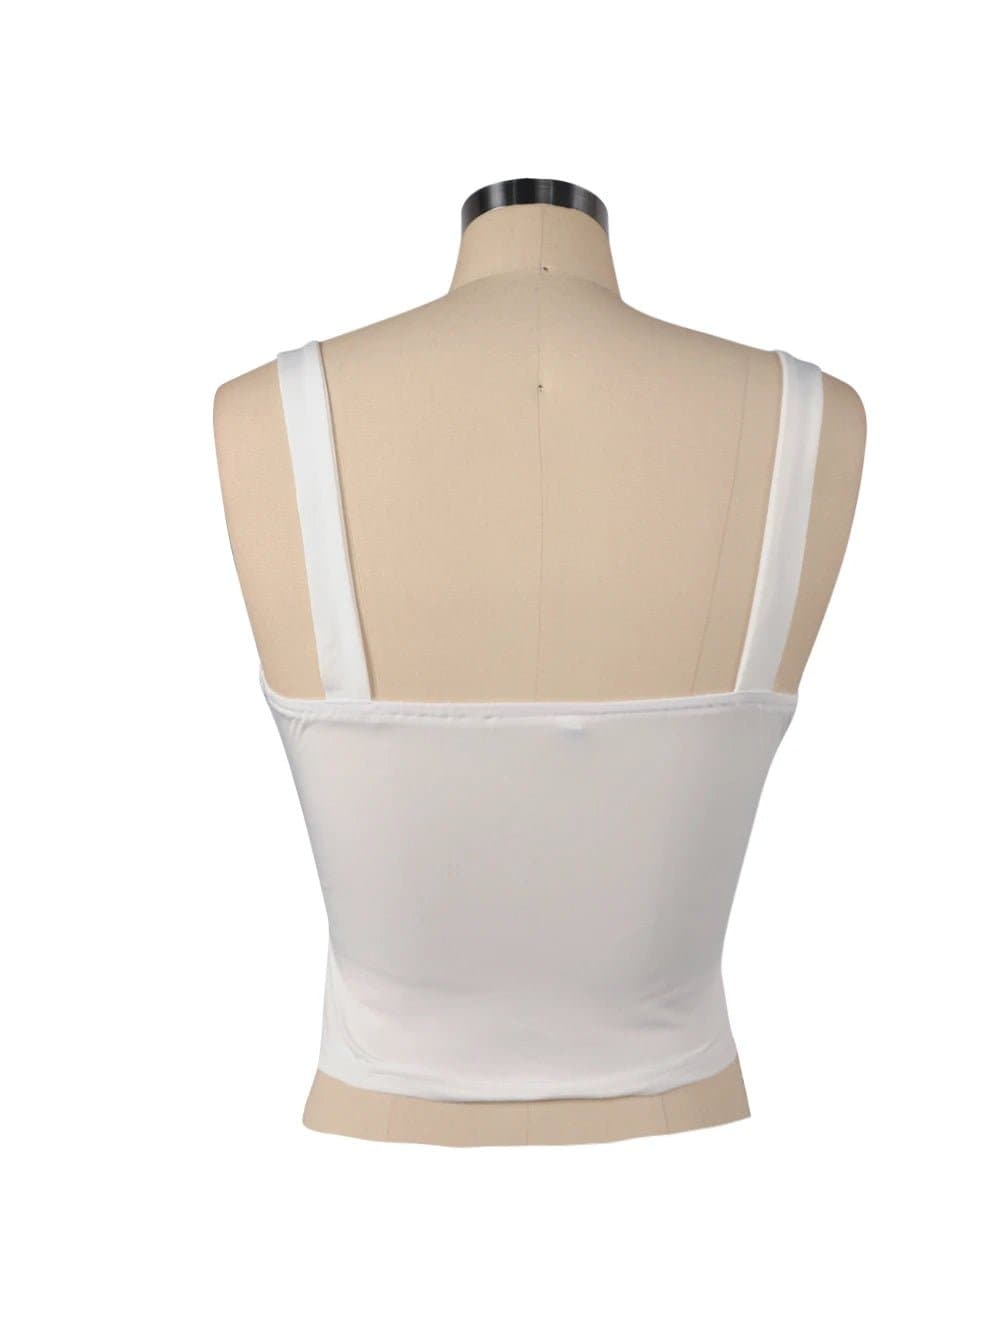 Hollow Out Short Crop Top - Sexy & Club Style, Silk Material - Wandering Woman